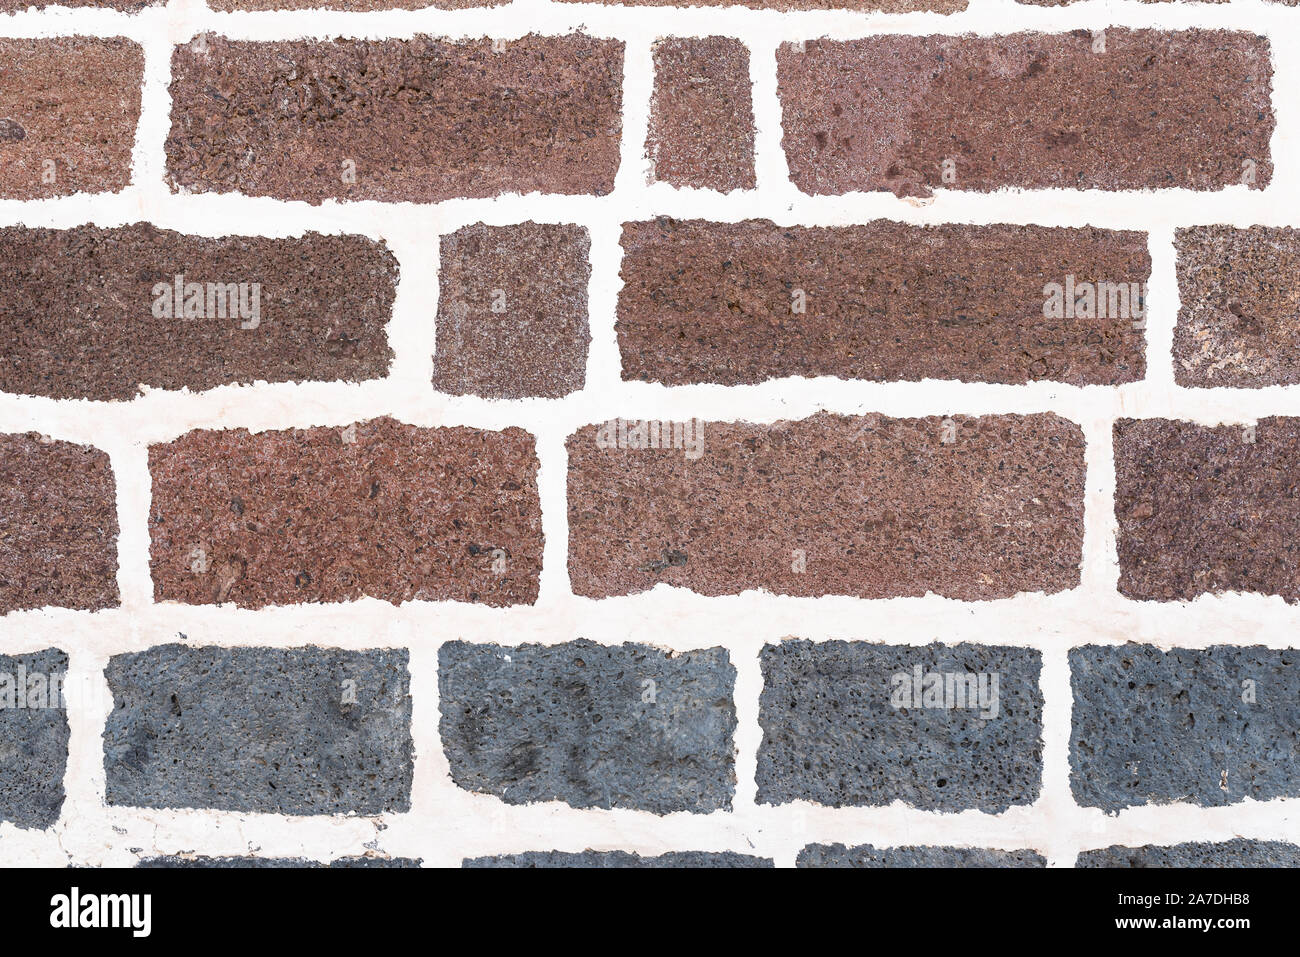 old brick wall background with white grout in joints Stock Photo